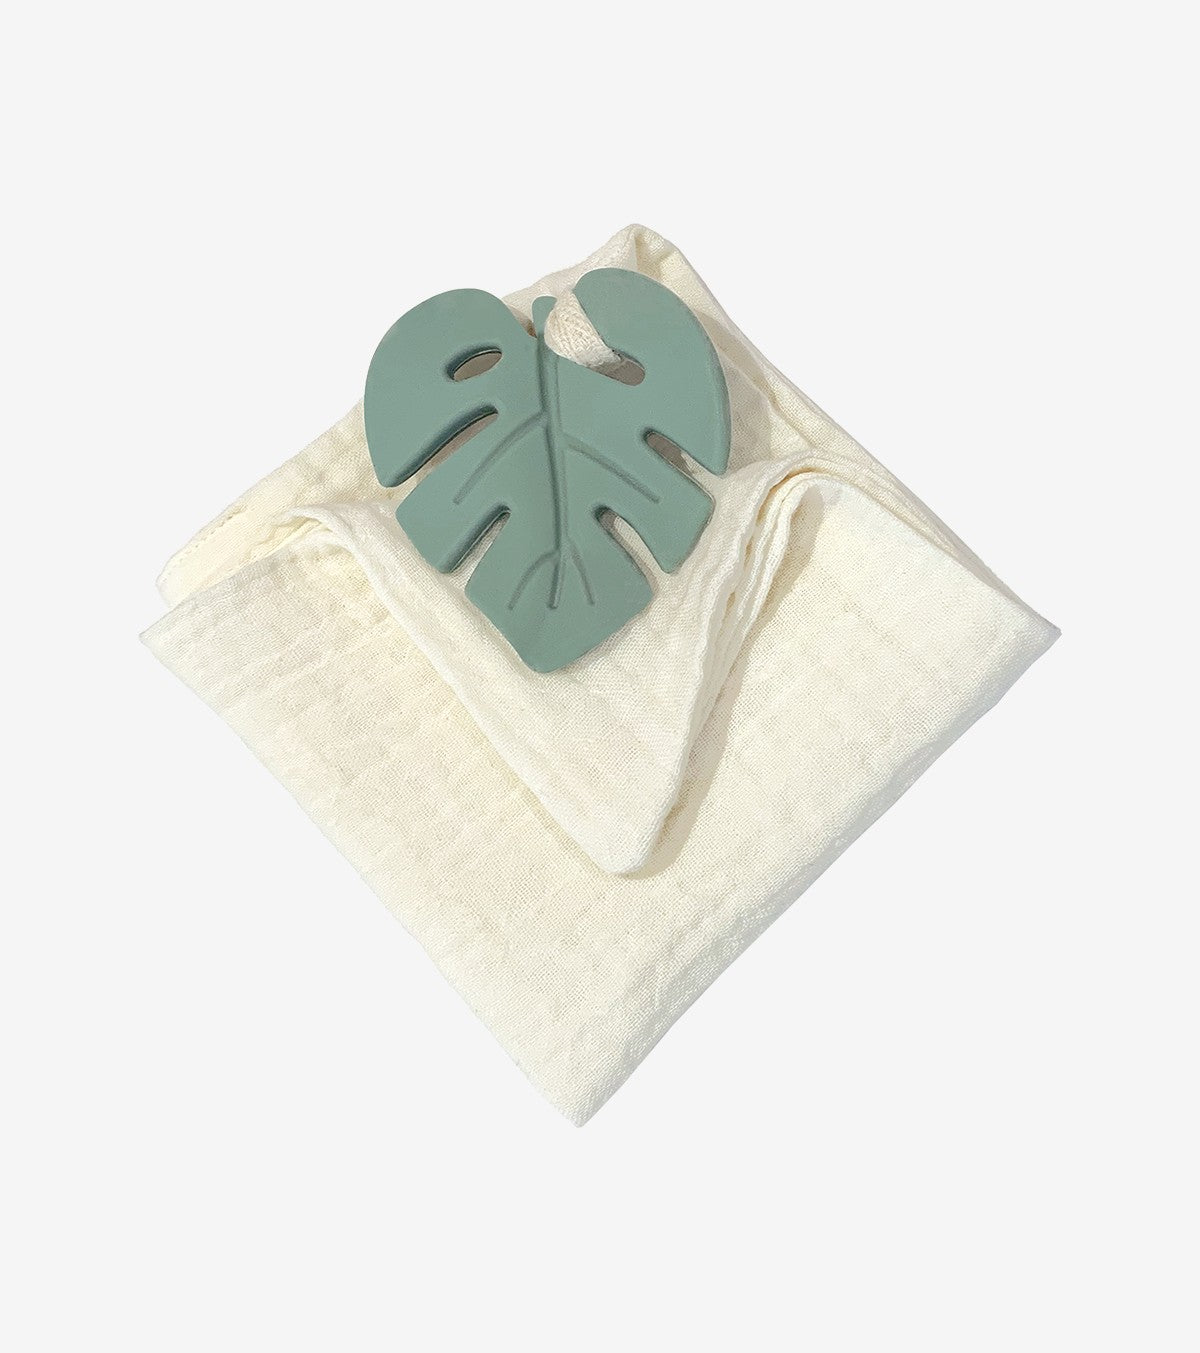 Teething ring with aqua leaf and diaper